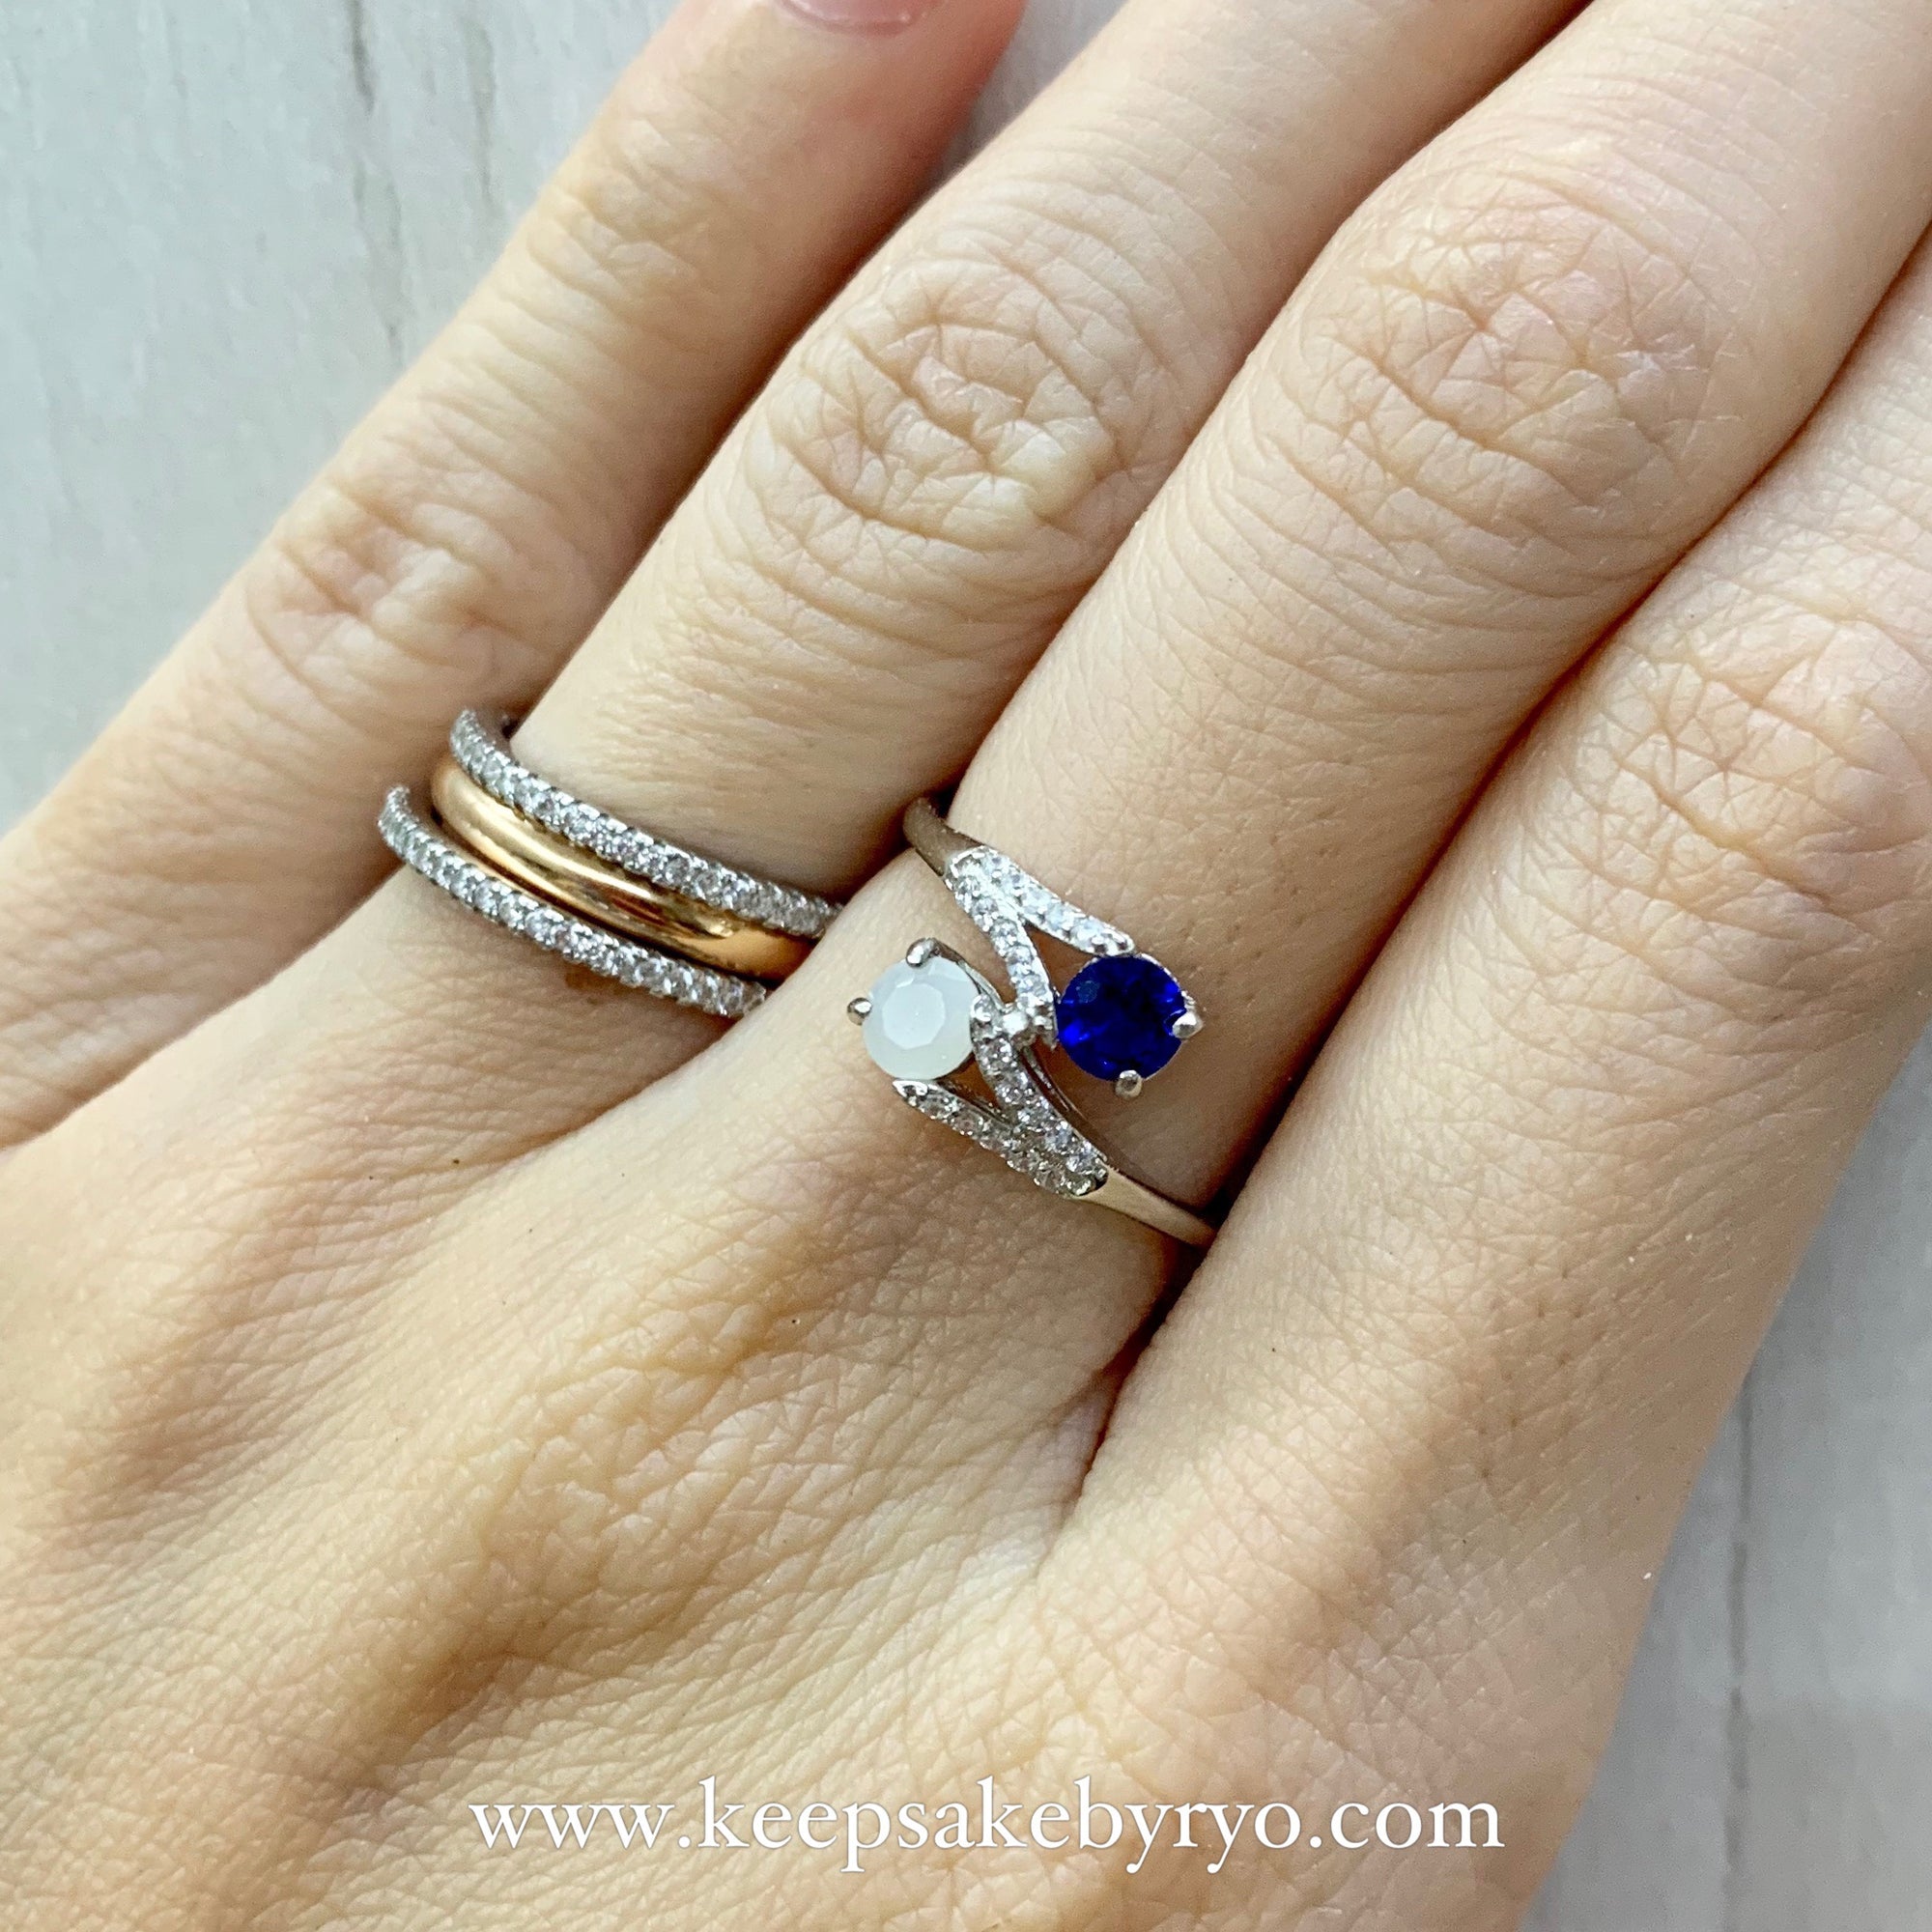 SOLITAIRE: LUNA BREASTMILK AND BIRTHSTONE DUO RING